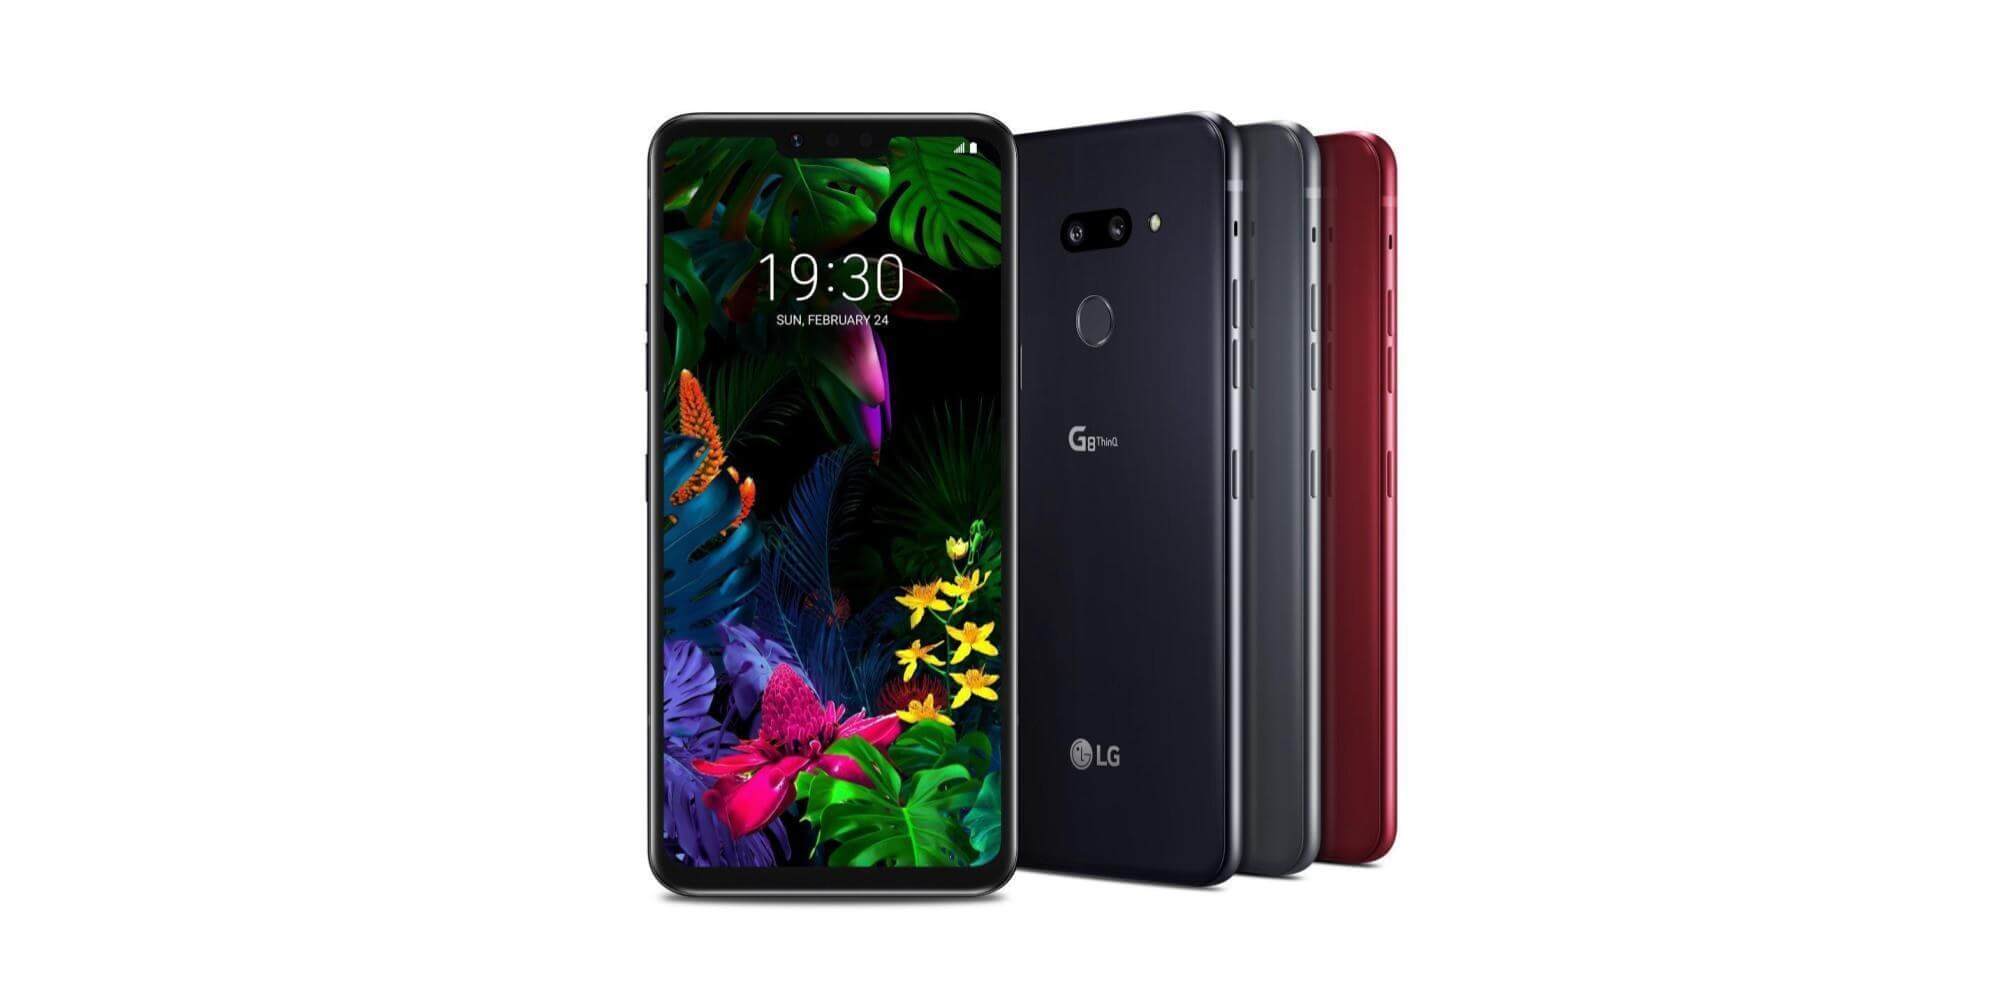 LG announces the G8 ThinQ and V50 ThinQ, featuring Hand ID, 5G support, and more